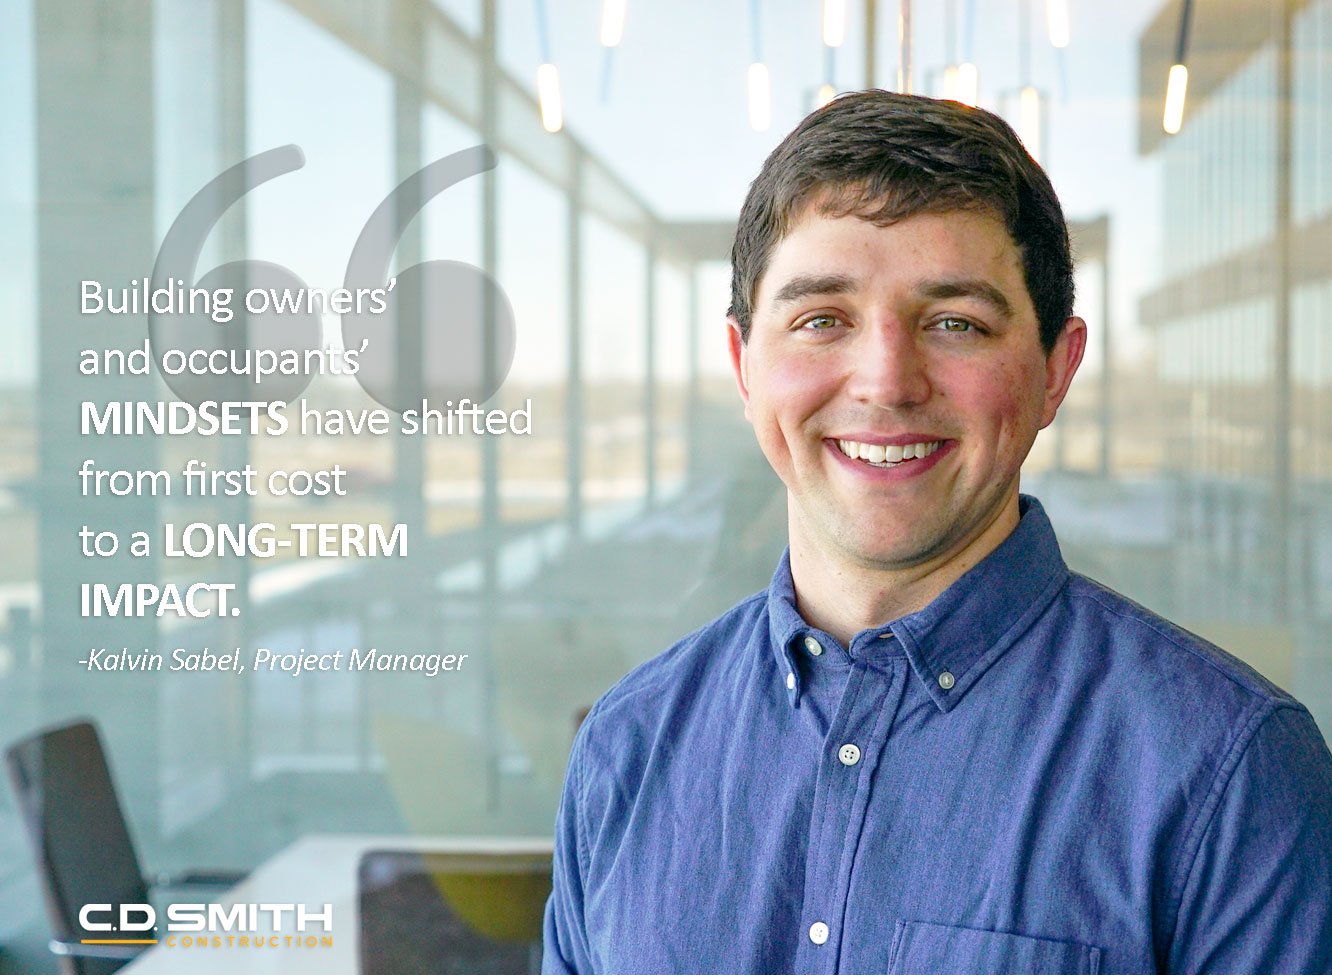 Project Manager Kalvin Sabel talks about a mindset of SUSTAINABILITY in commercial building & construction projects.